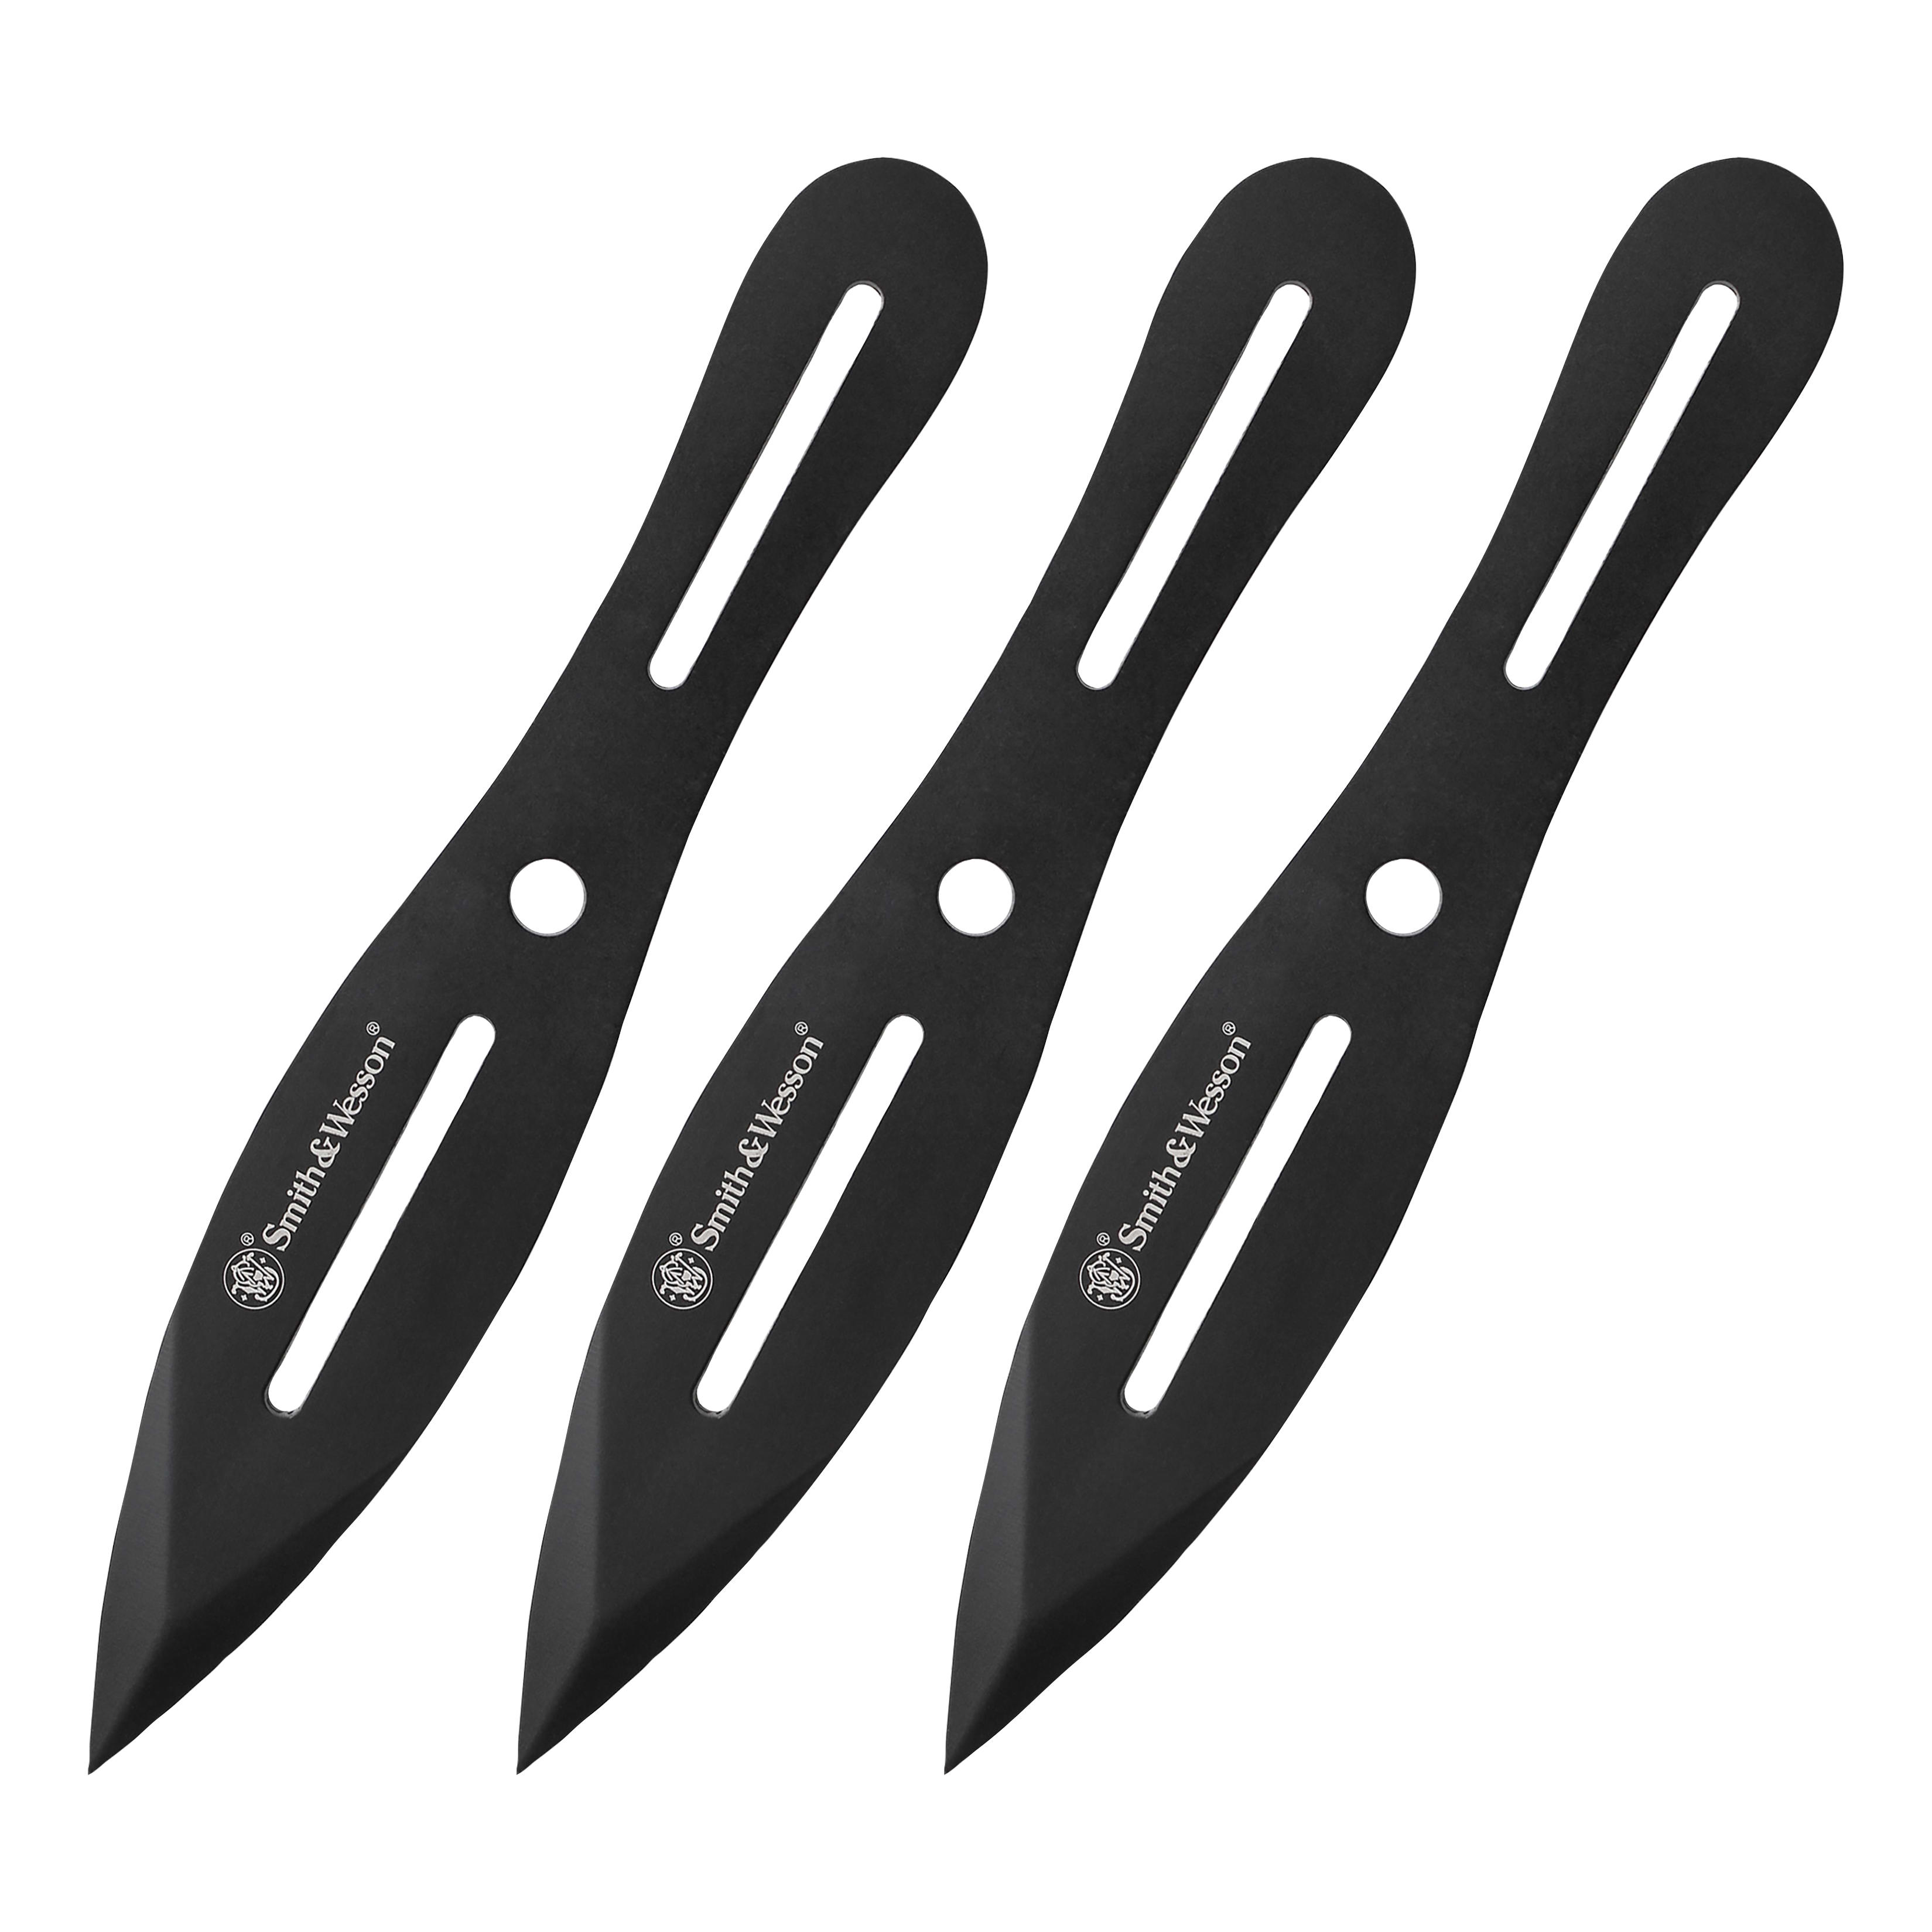 Smith & Wesson® 8" Throwing-Knife Set